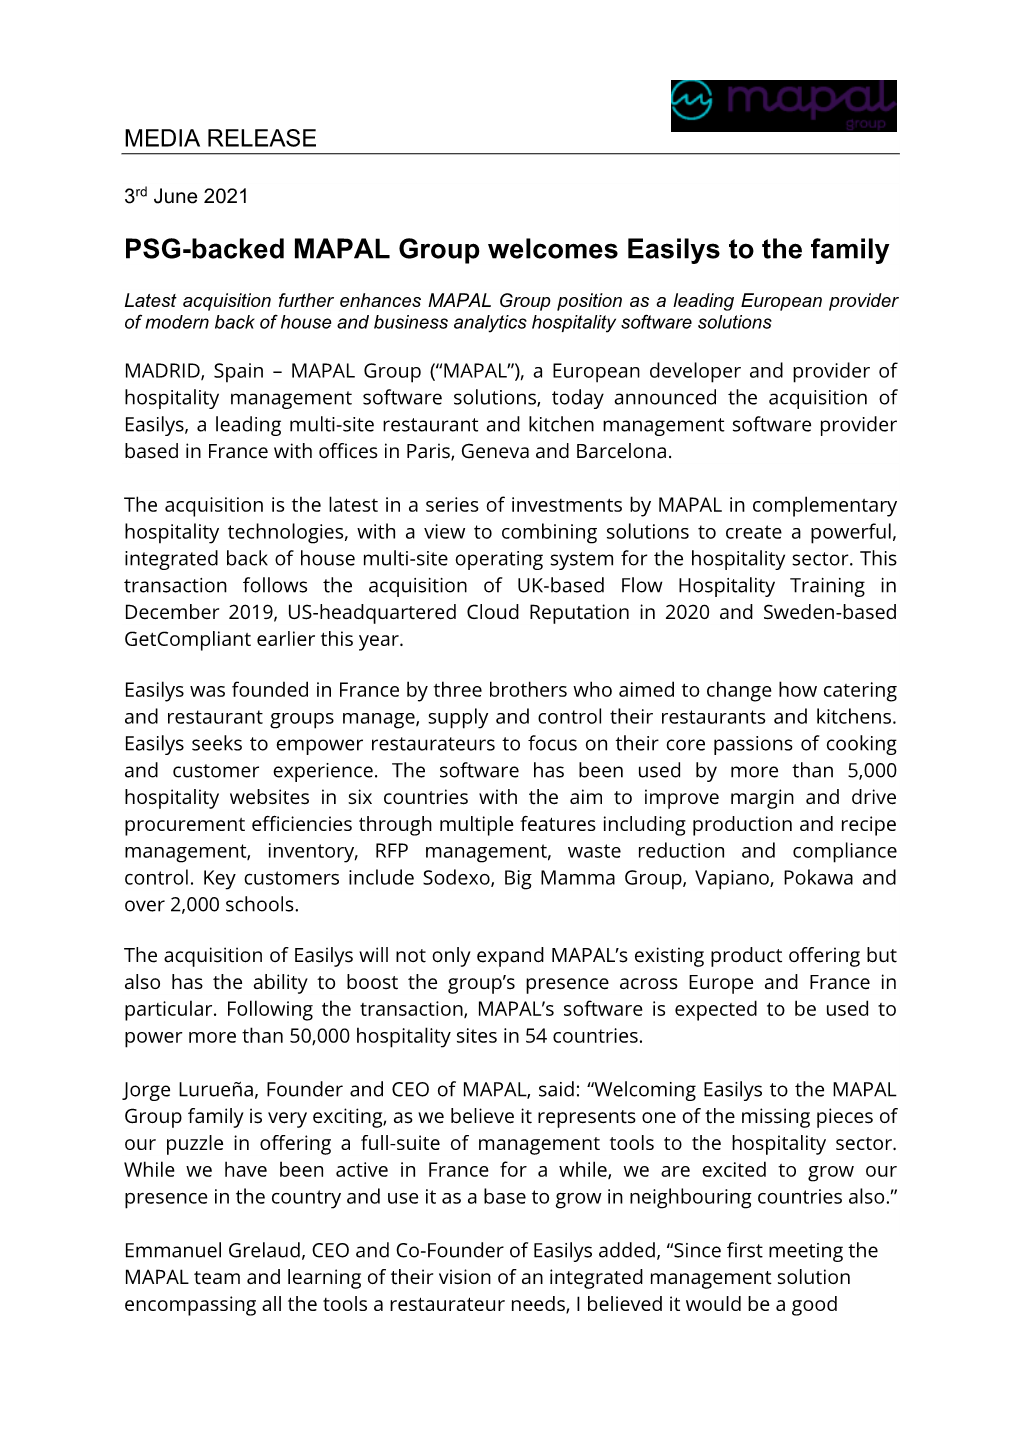 PSG-Backed MAPAL Group Welcomes Easilys to the Family